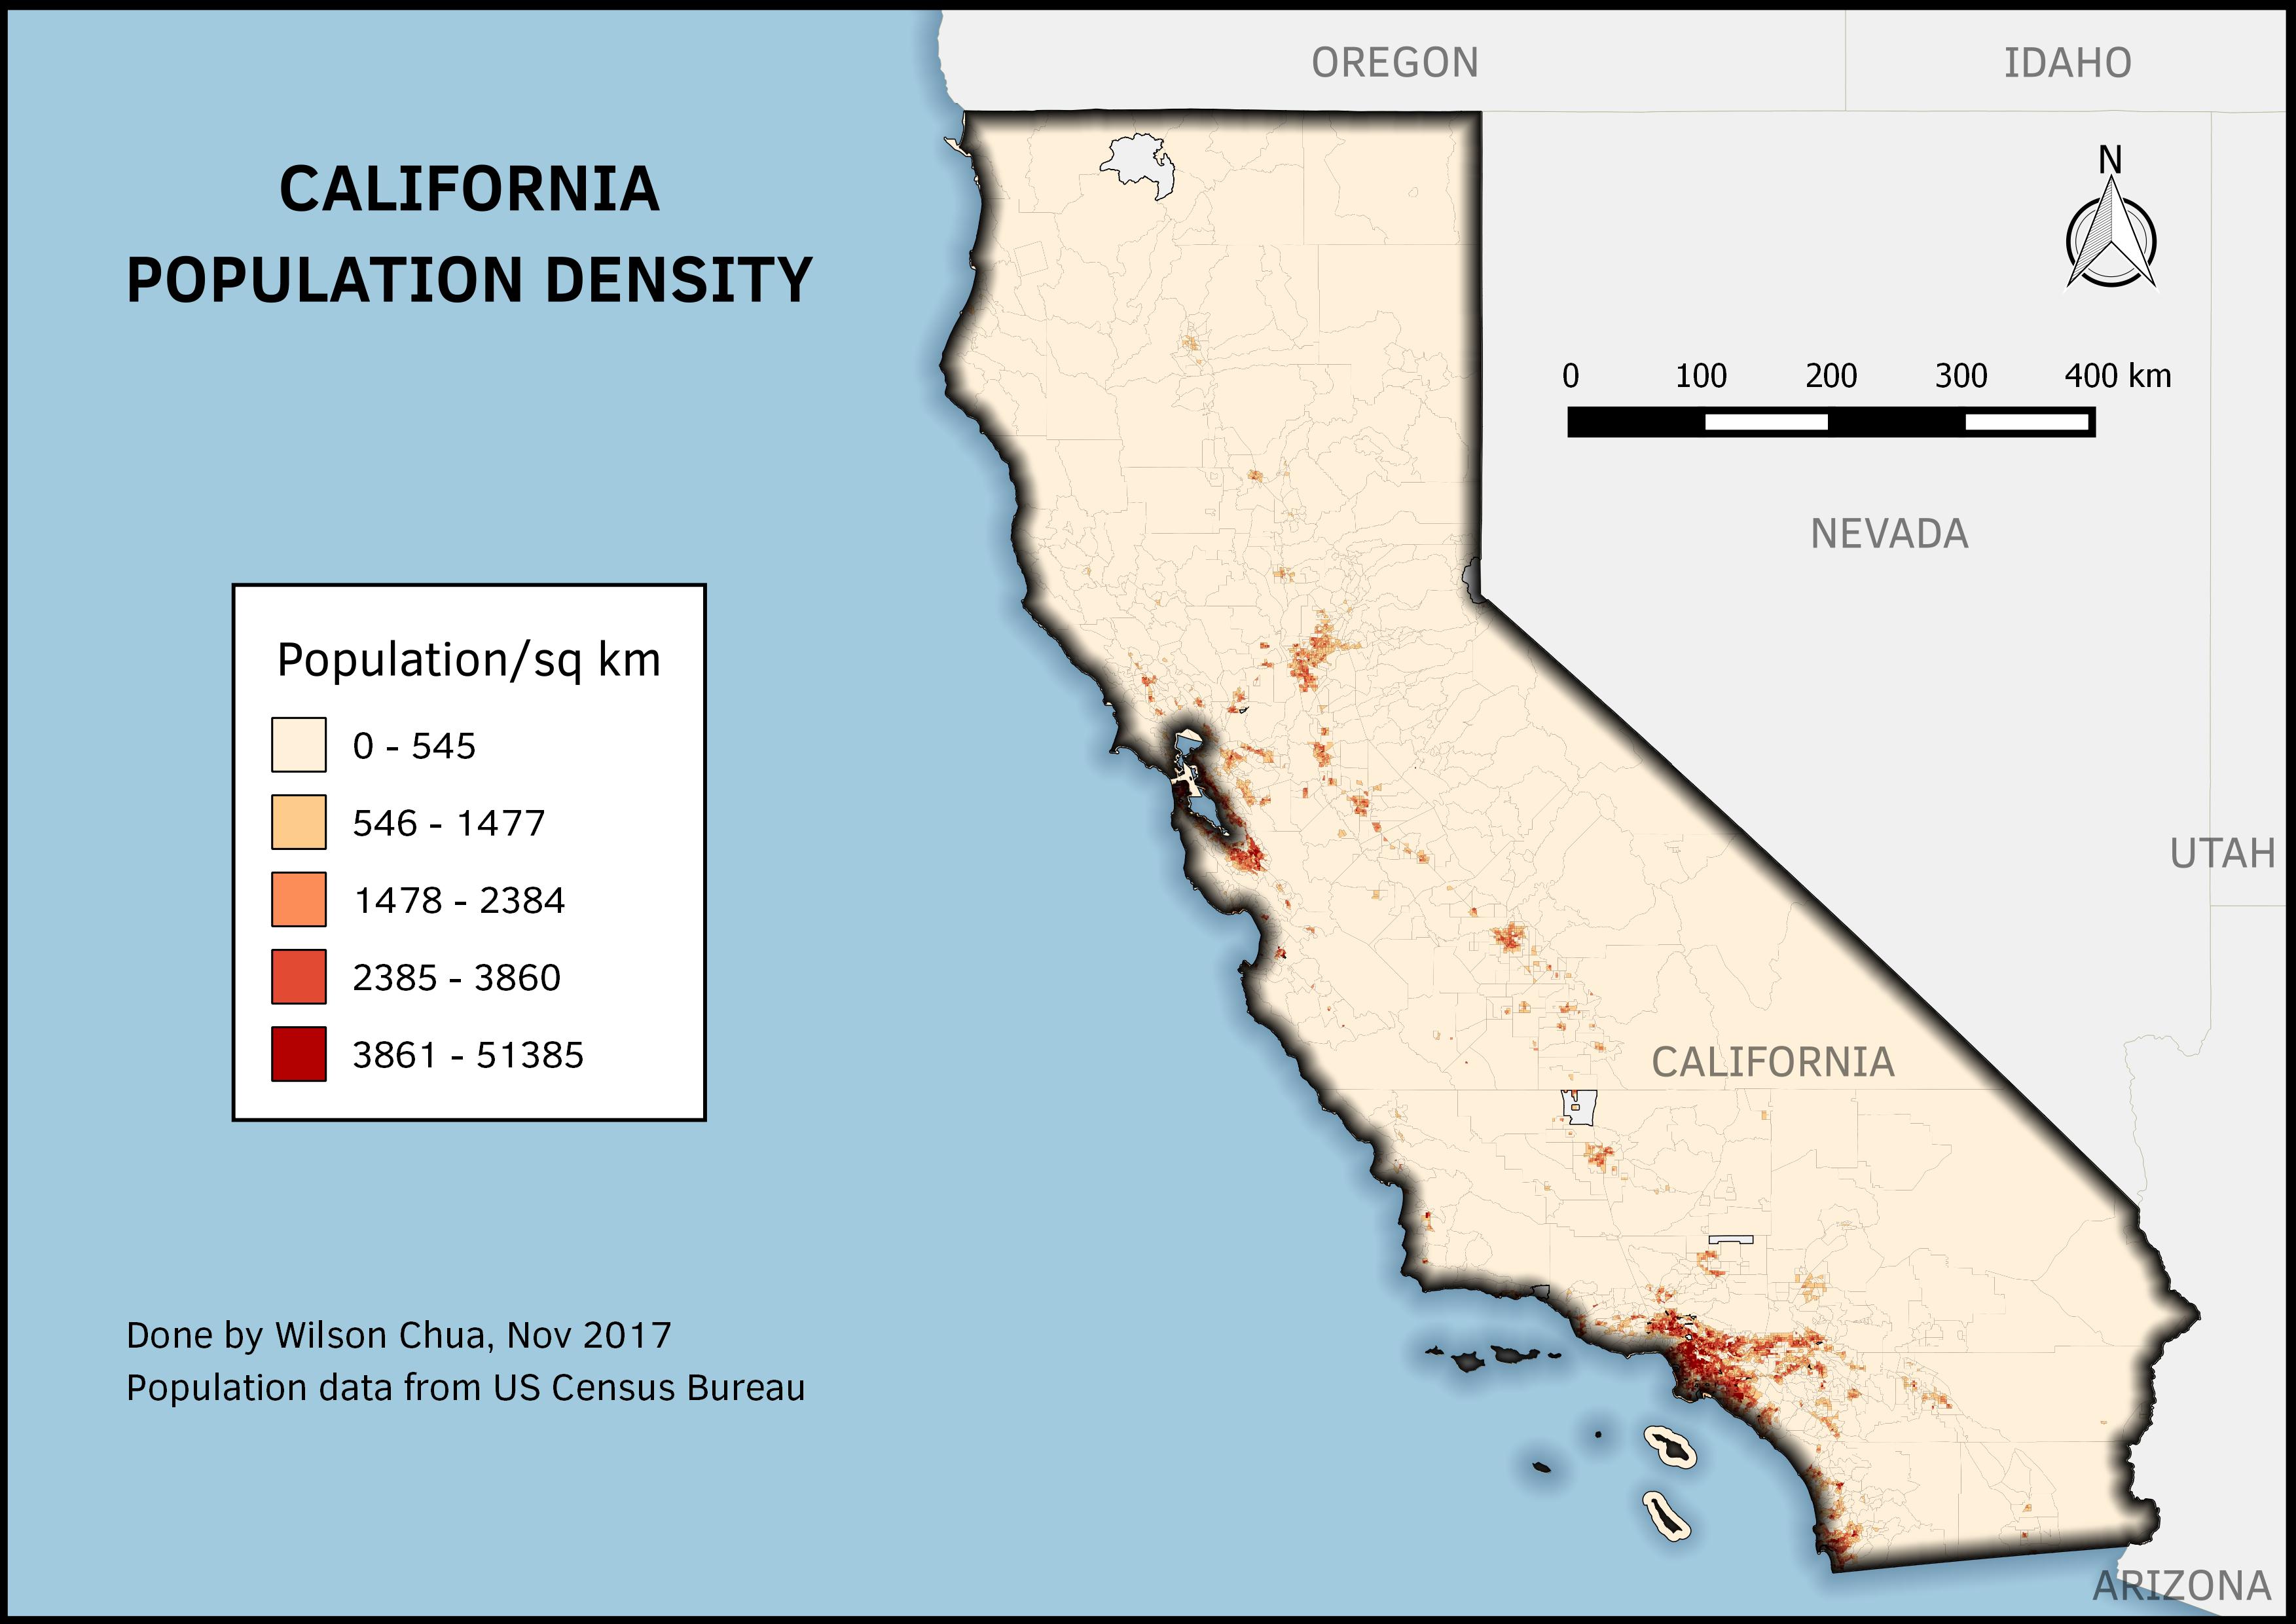 Overview of California's Population Density, per Census Tract